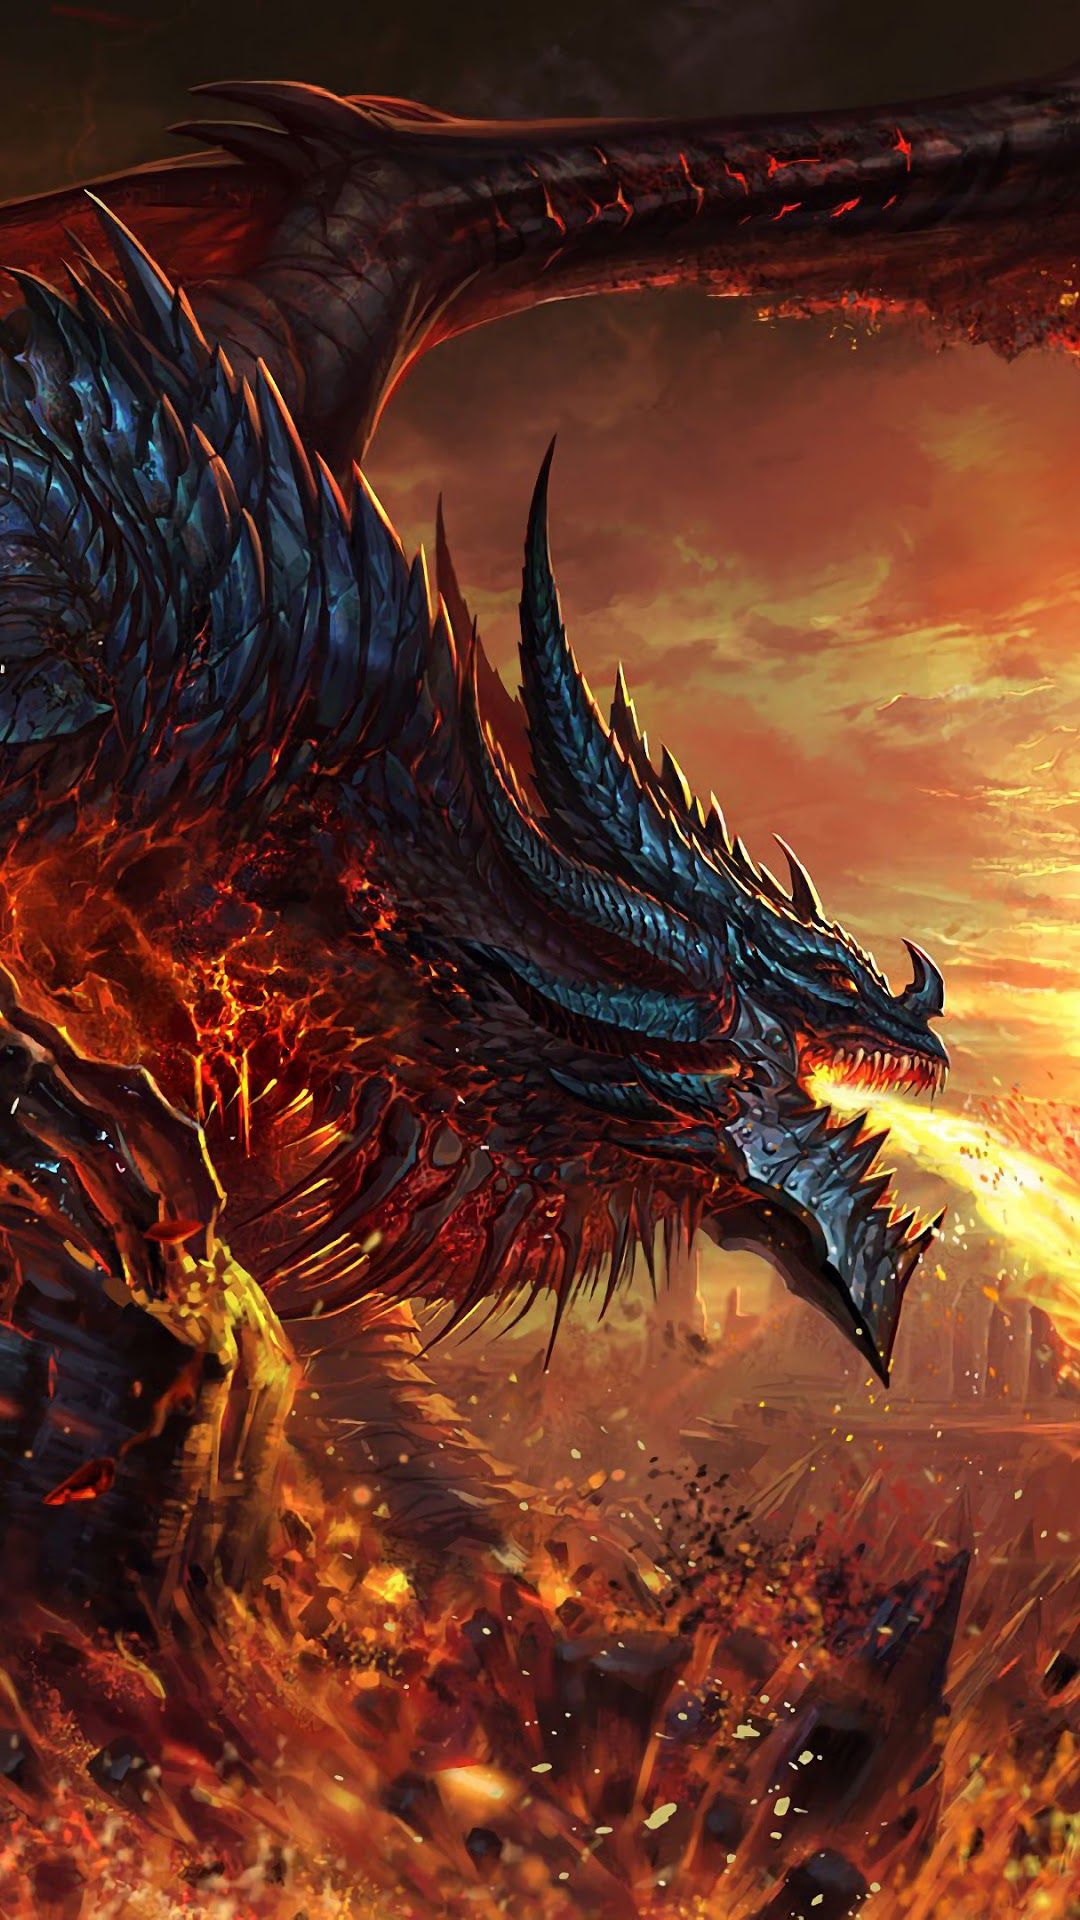 Dragon wallpapers hd, desktop backgrounds, images and pictures